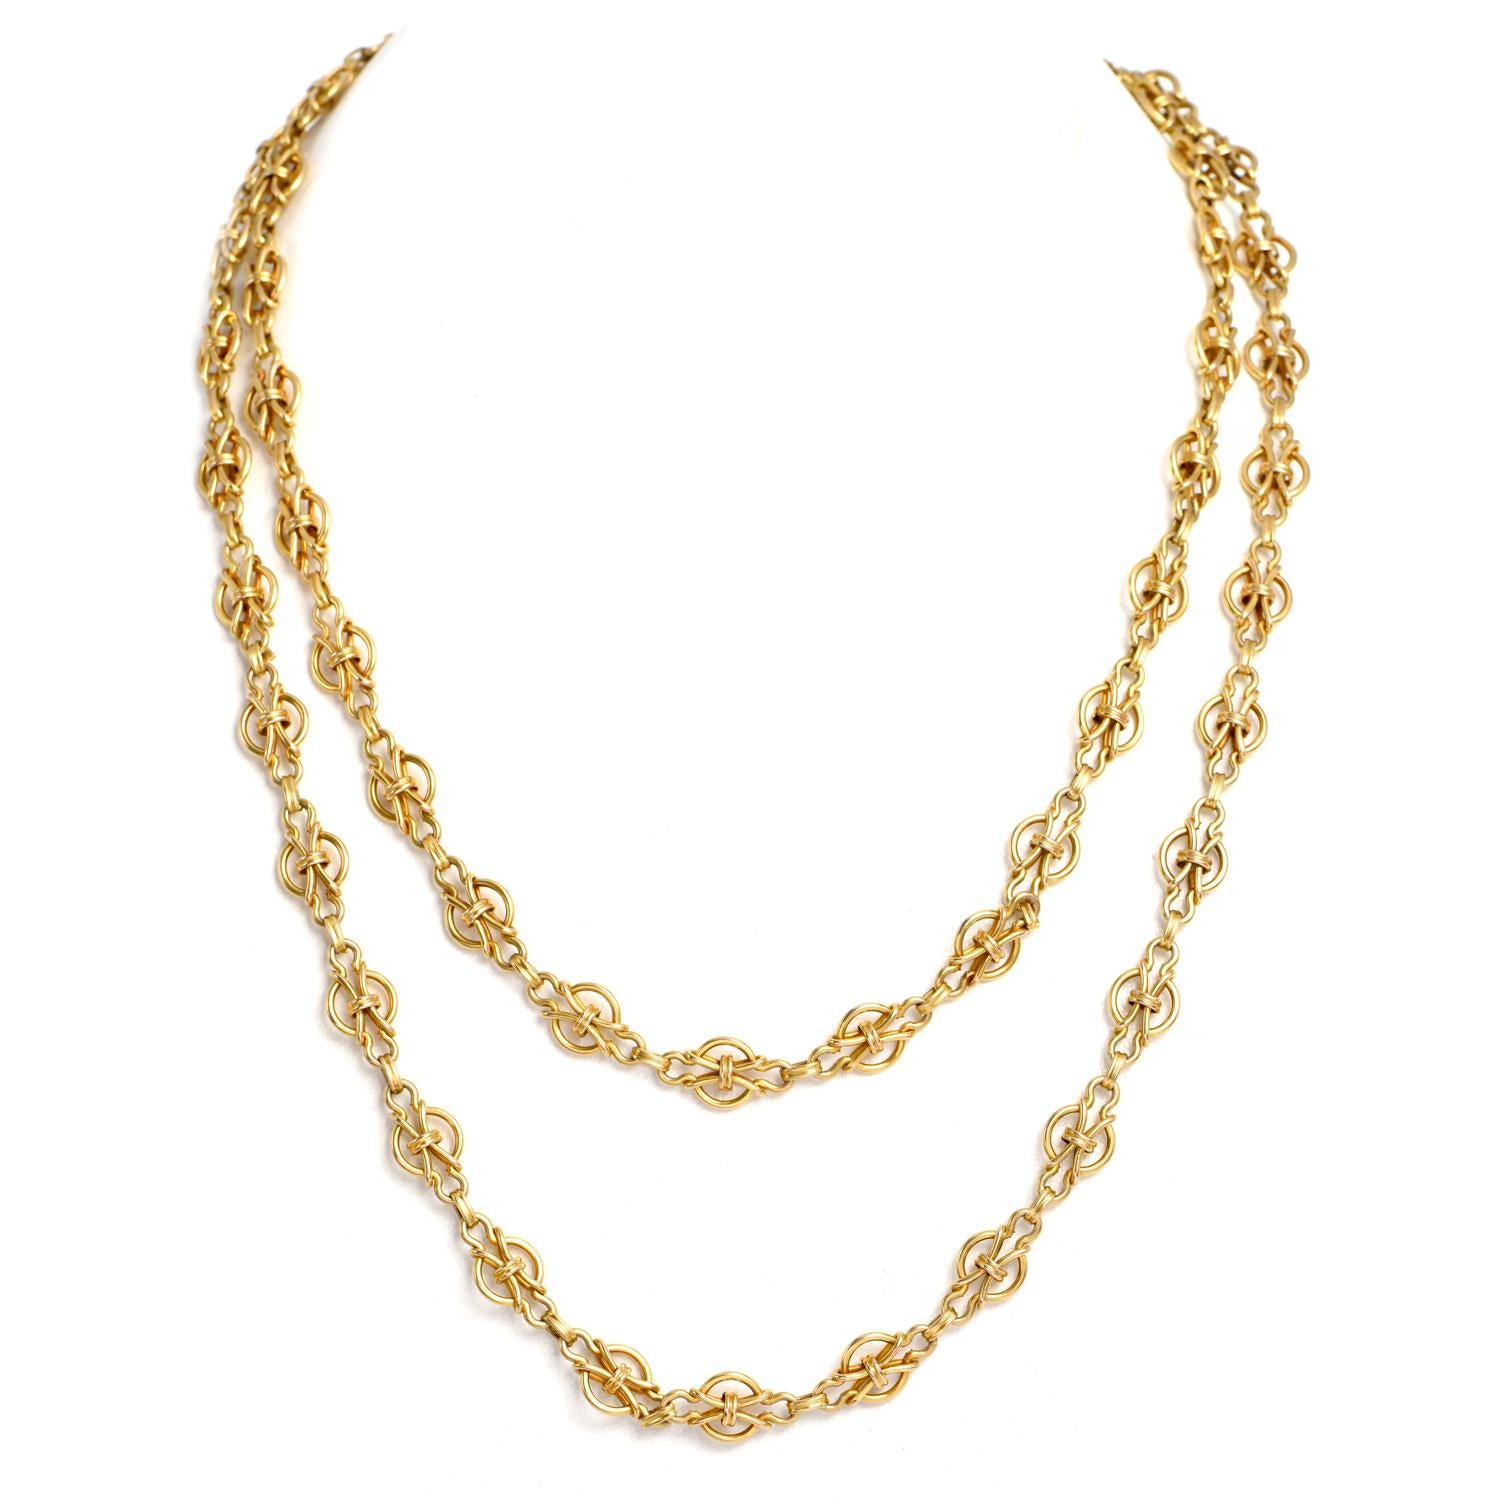 With a Saturated Golden Color thanks to the Patina formation over the years, this fancy vintage link chain necklace is a perfect addition to any collection, 

Weighing 58.8 Grams of pure 18K Yellow Gold Gold.

Fancy Helm-inspired interconnected